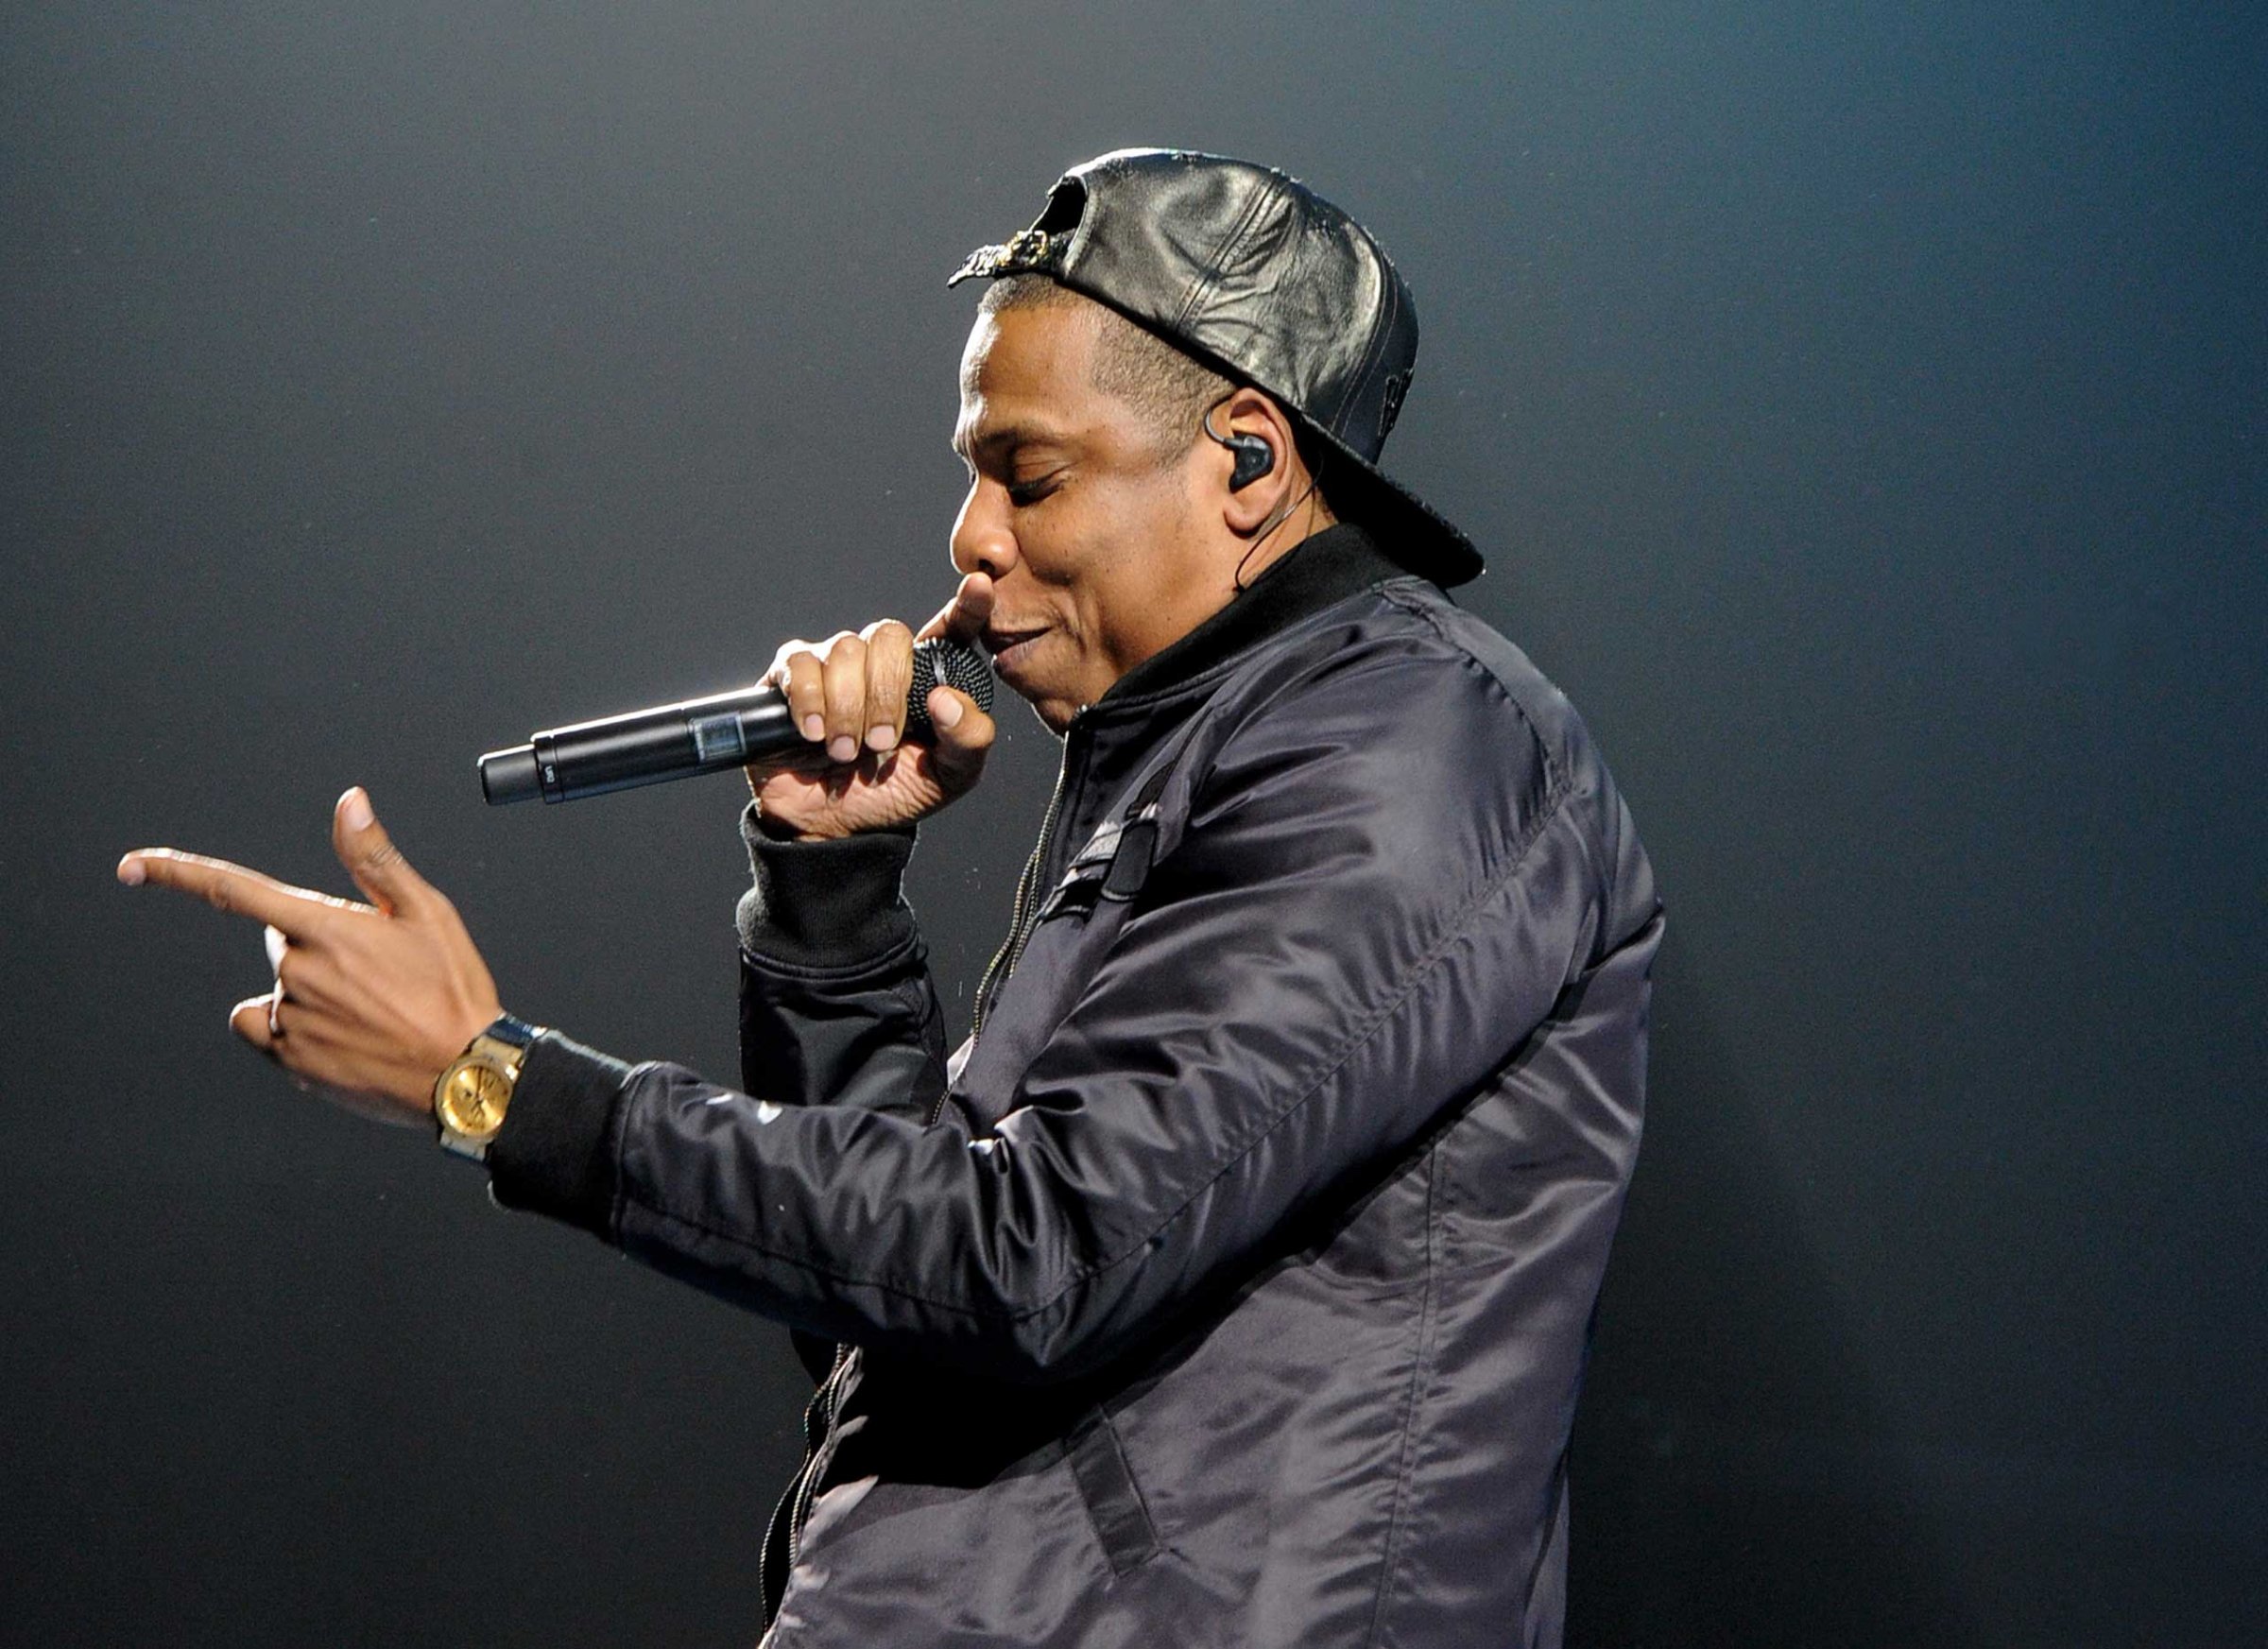 Jay Z performs at The Staples Center in Los Angeles in 2013.